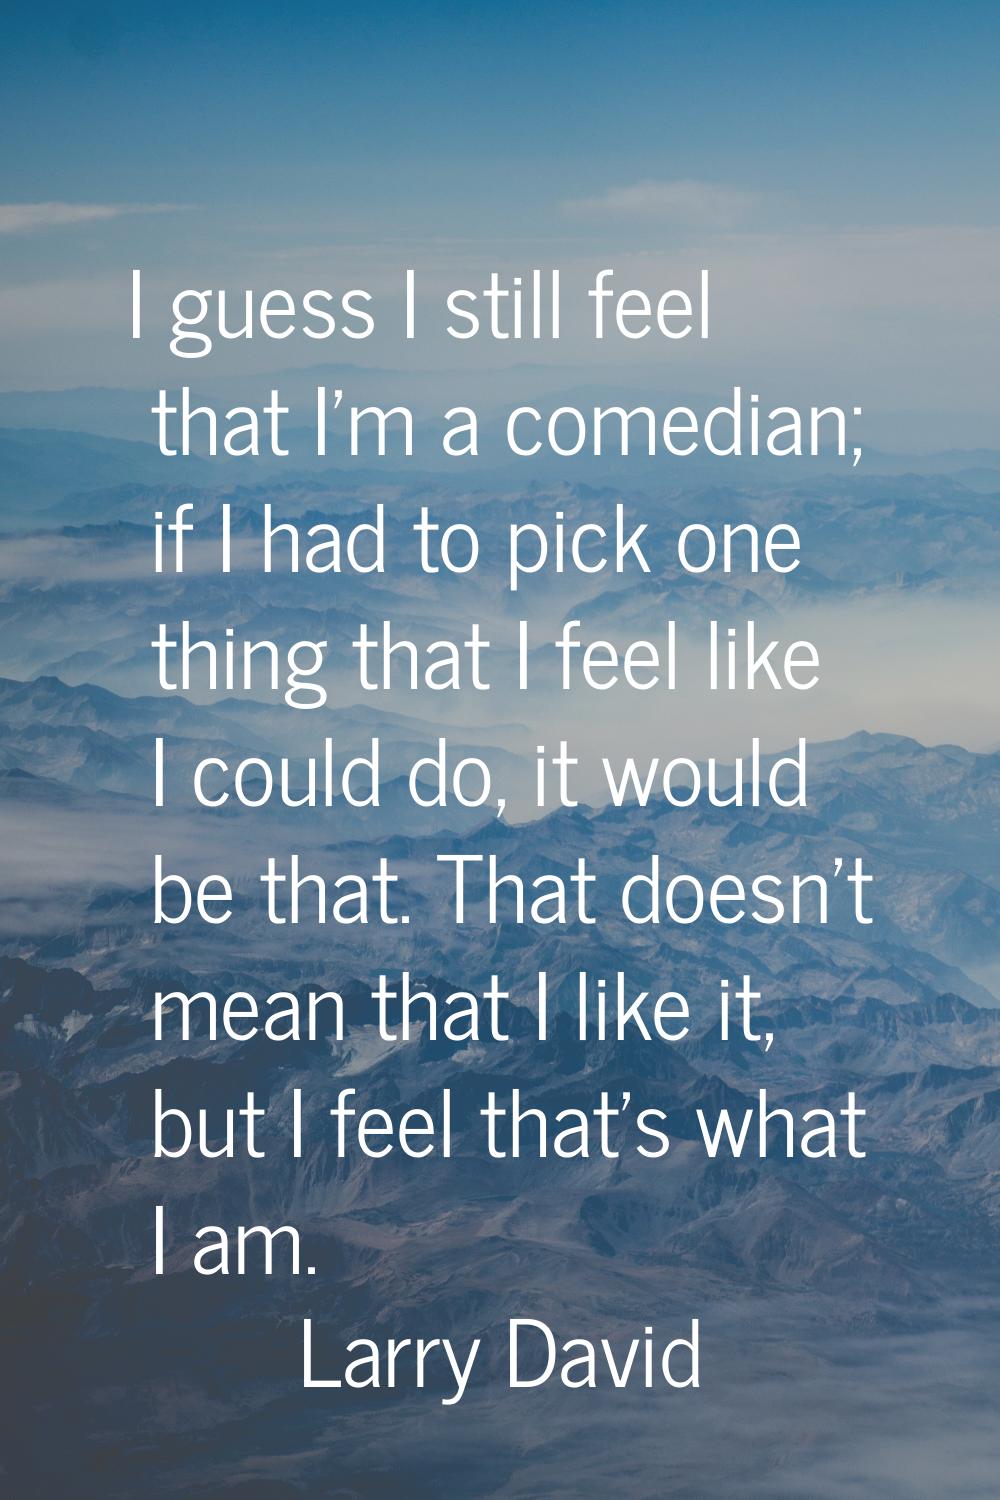 I guess I still feel that I'm a comedian; if I had to pick one thing that I feel like I could do, i